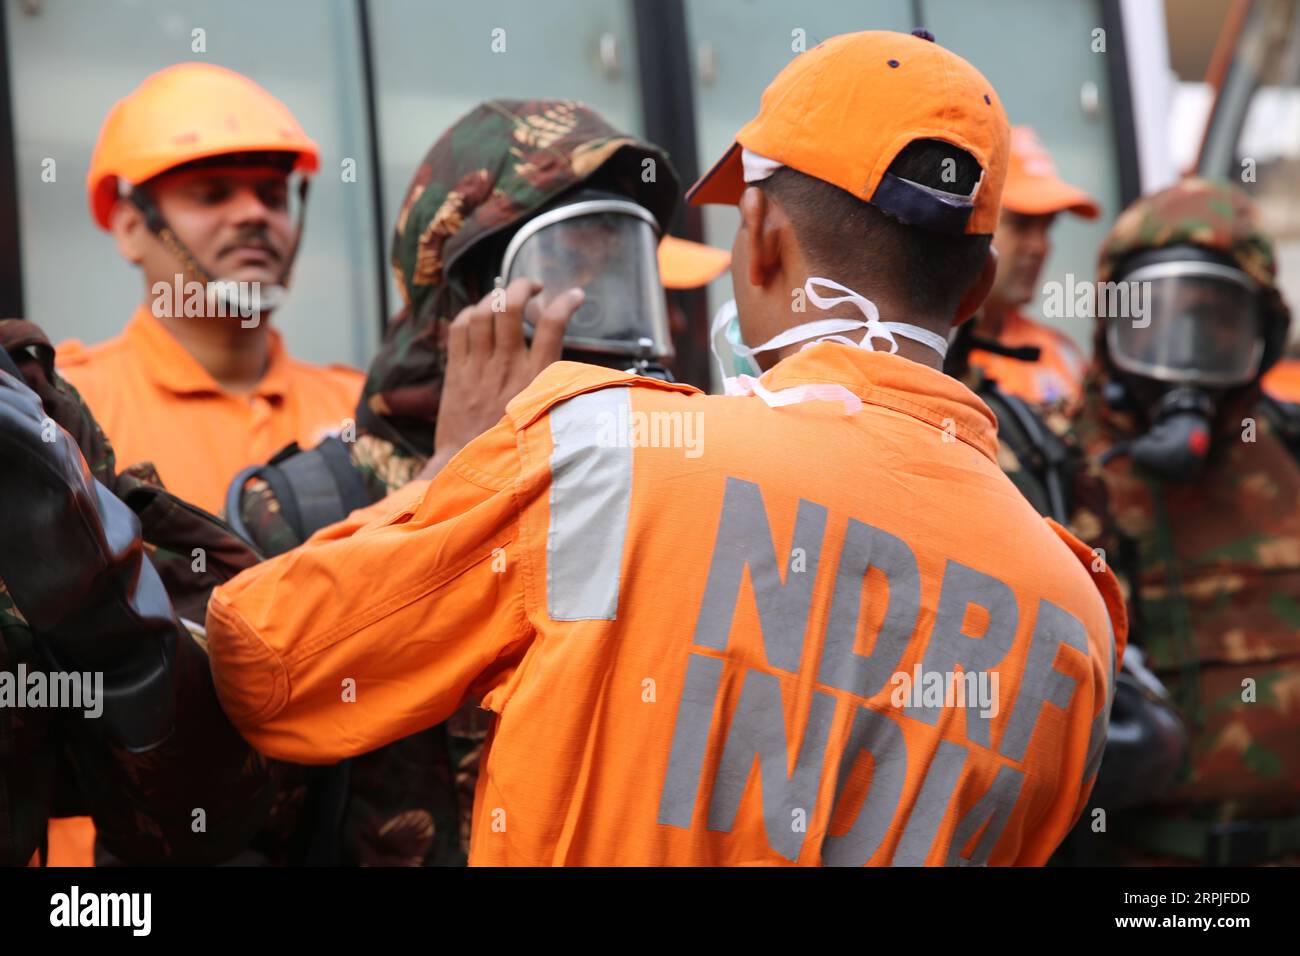 191208 -- NEW DELHI, Dec. 8, 2019 -- Rescuers prepare to enter the site of a fire incident in New Delhi, India, Dec. 8, 2019. At least 43 people died and more than 50 injured in the fire incident. The injured are undergoing medical treatment at four different hospitals. The fire broke out inside a four storey building in north Delhi s Filmistan area. Most of those died were migrant labourers from the country s eastern state of Bihar, and were asleep when the fire broke out in the early hours of Sunday.  INDIA-NEW DELHI-FIRE INCIDENT ZhaoxXu PUBLICATIONxNOTxINxCHN Stock Photo